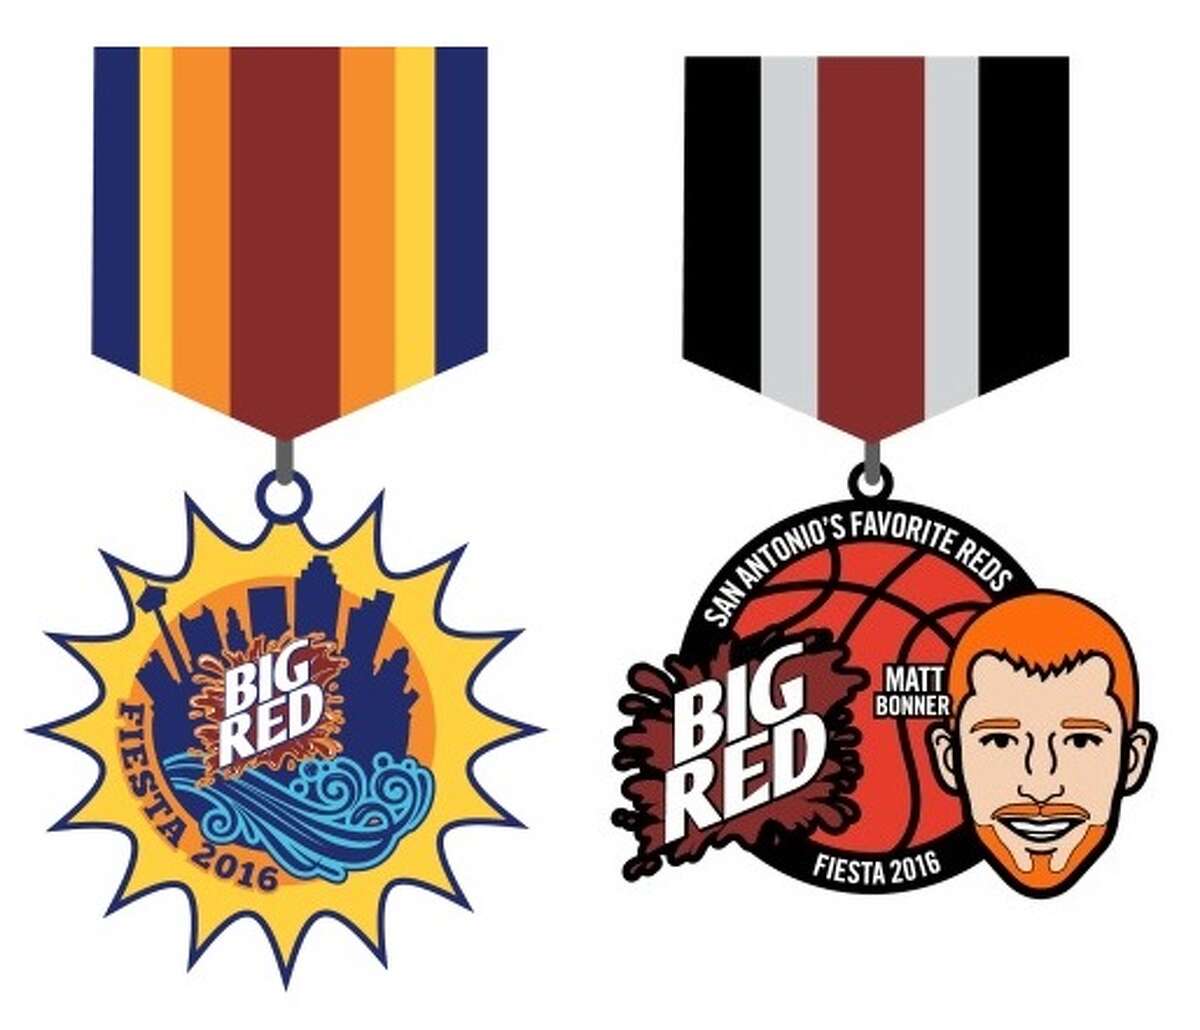 Fans invited to design Big Red's 2019 Fiesta medal